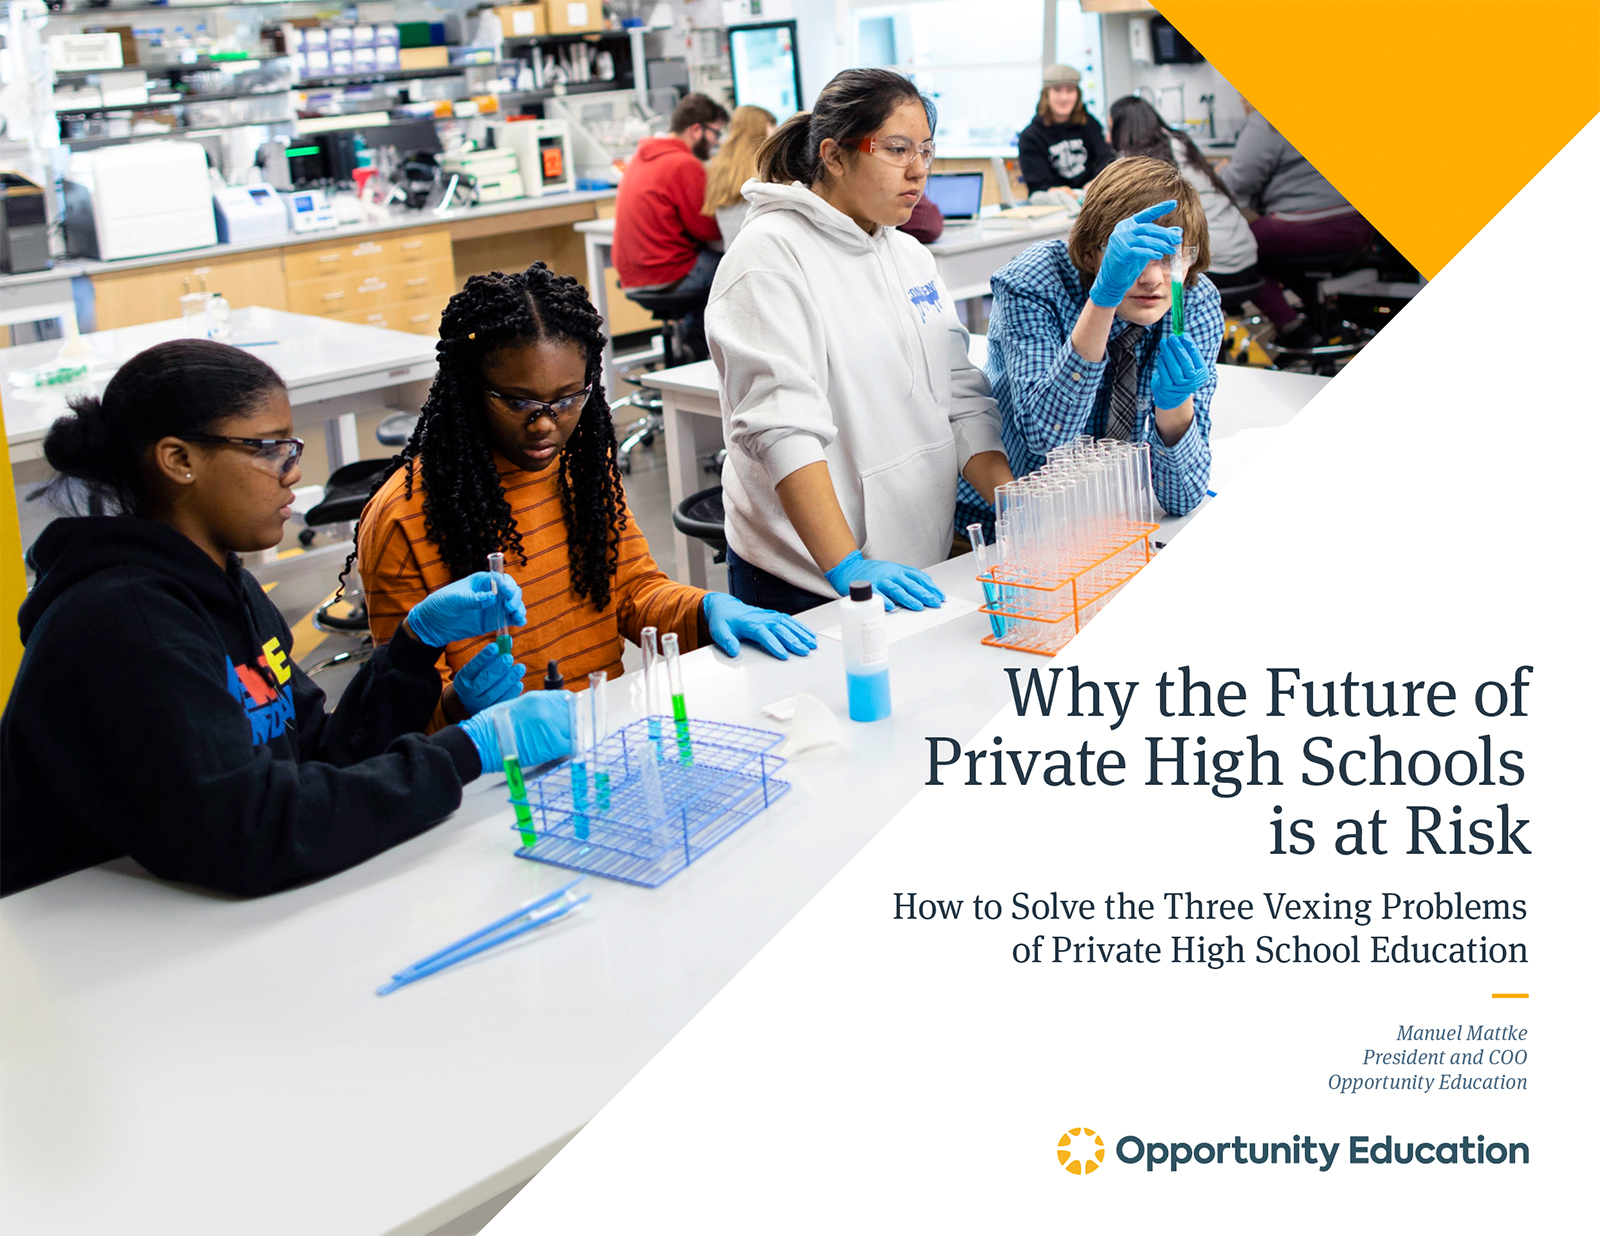 The cover of the ebook by Opportunity Education, titled "Why the Future of Private High Schools is at Risk."